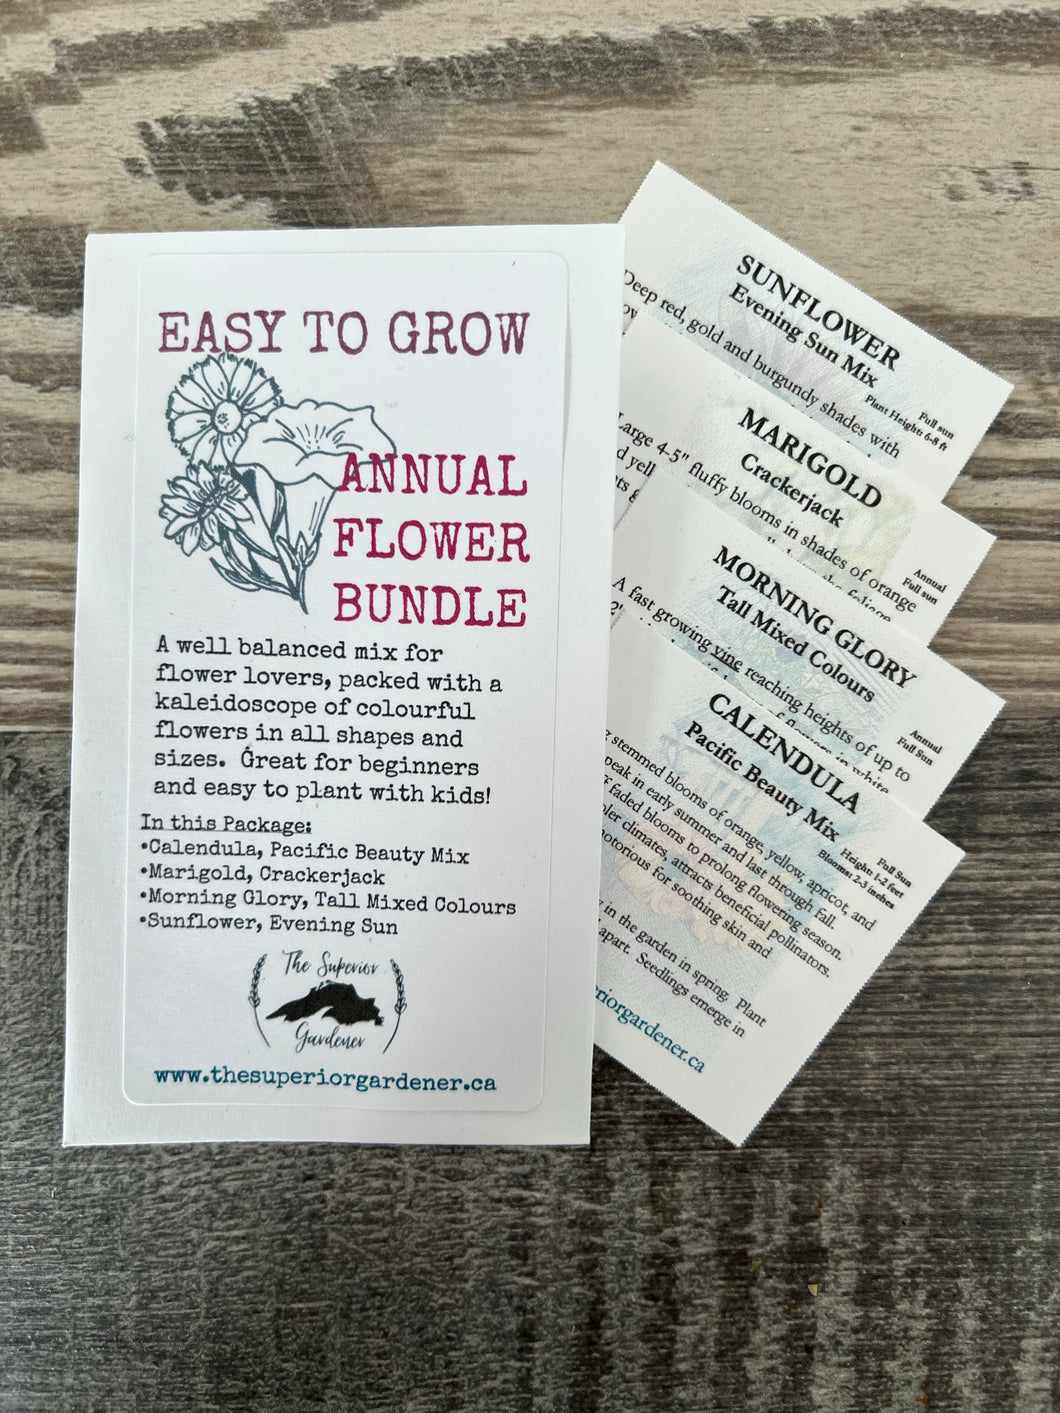 EASY TO GROW: Annual Flower Bundle